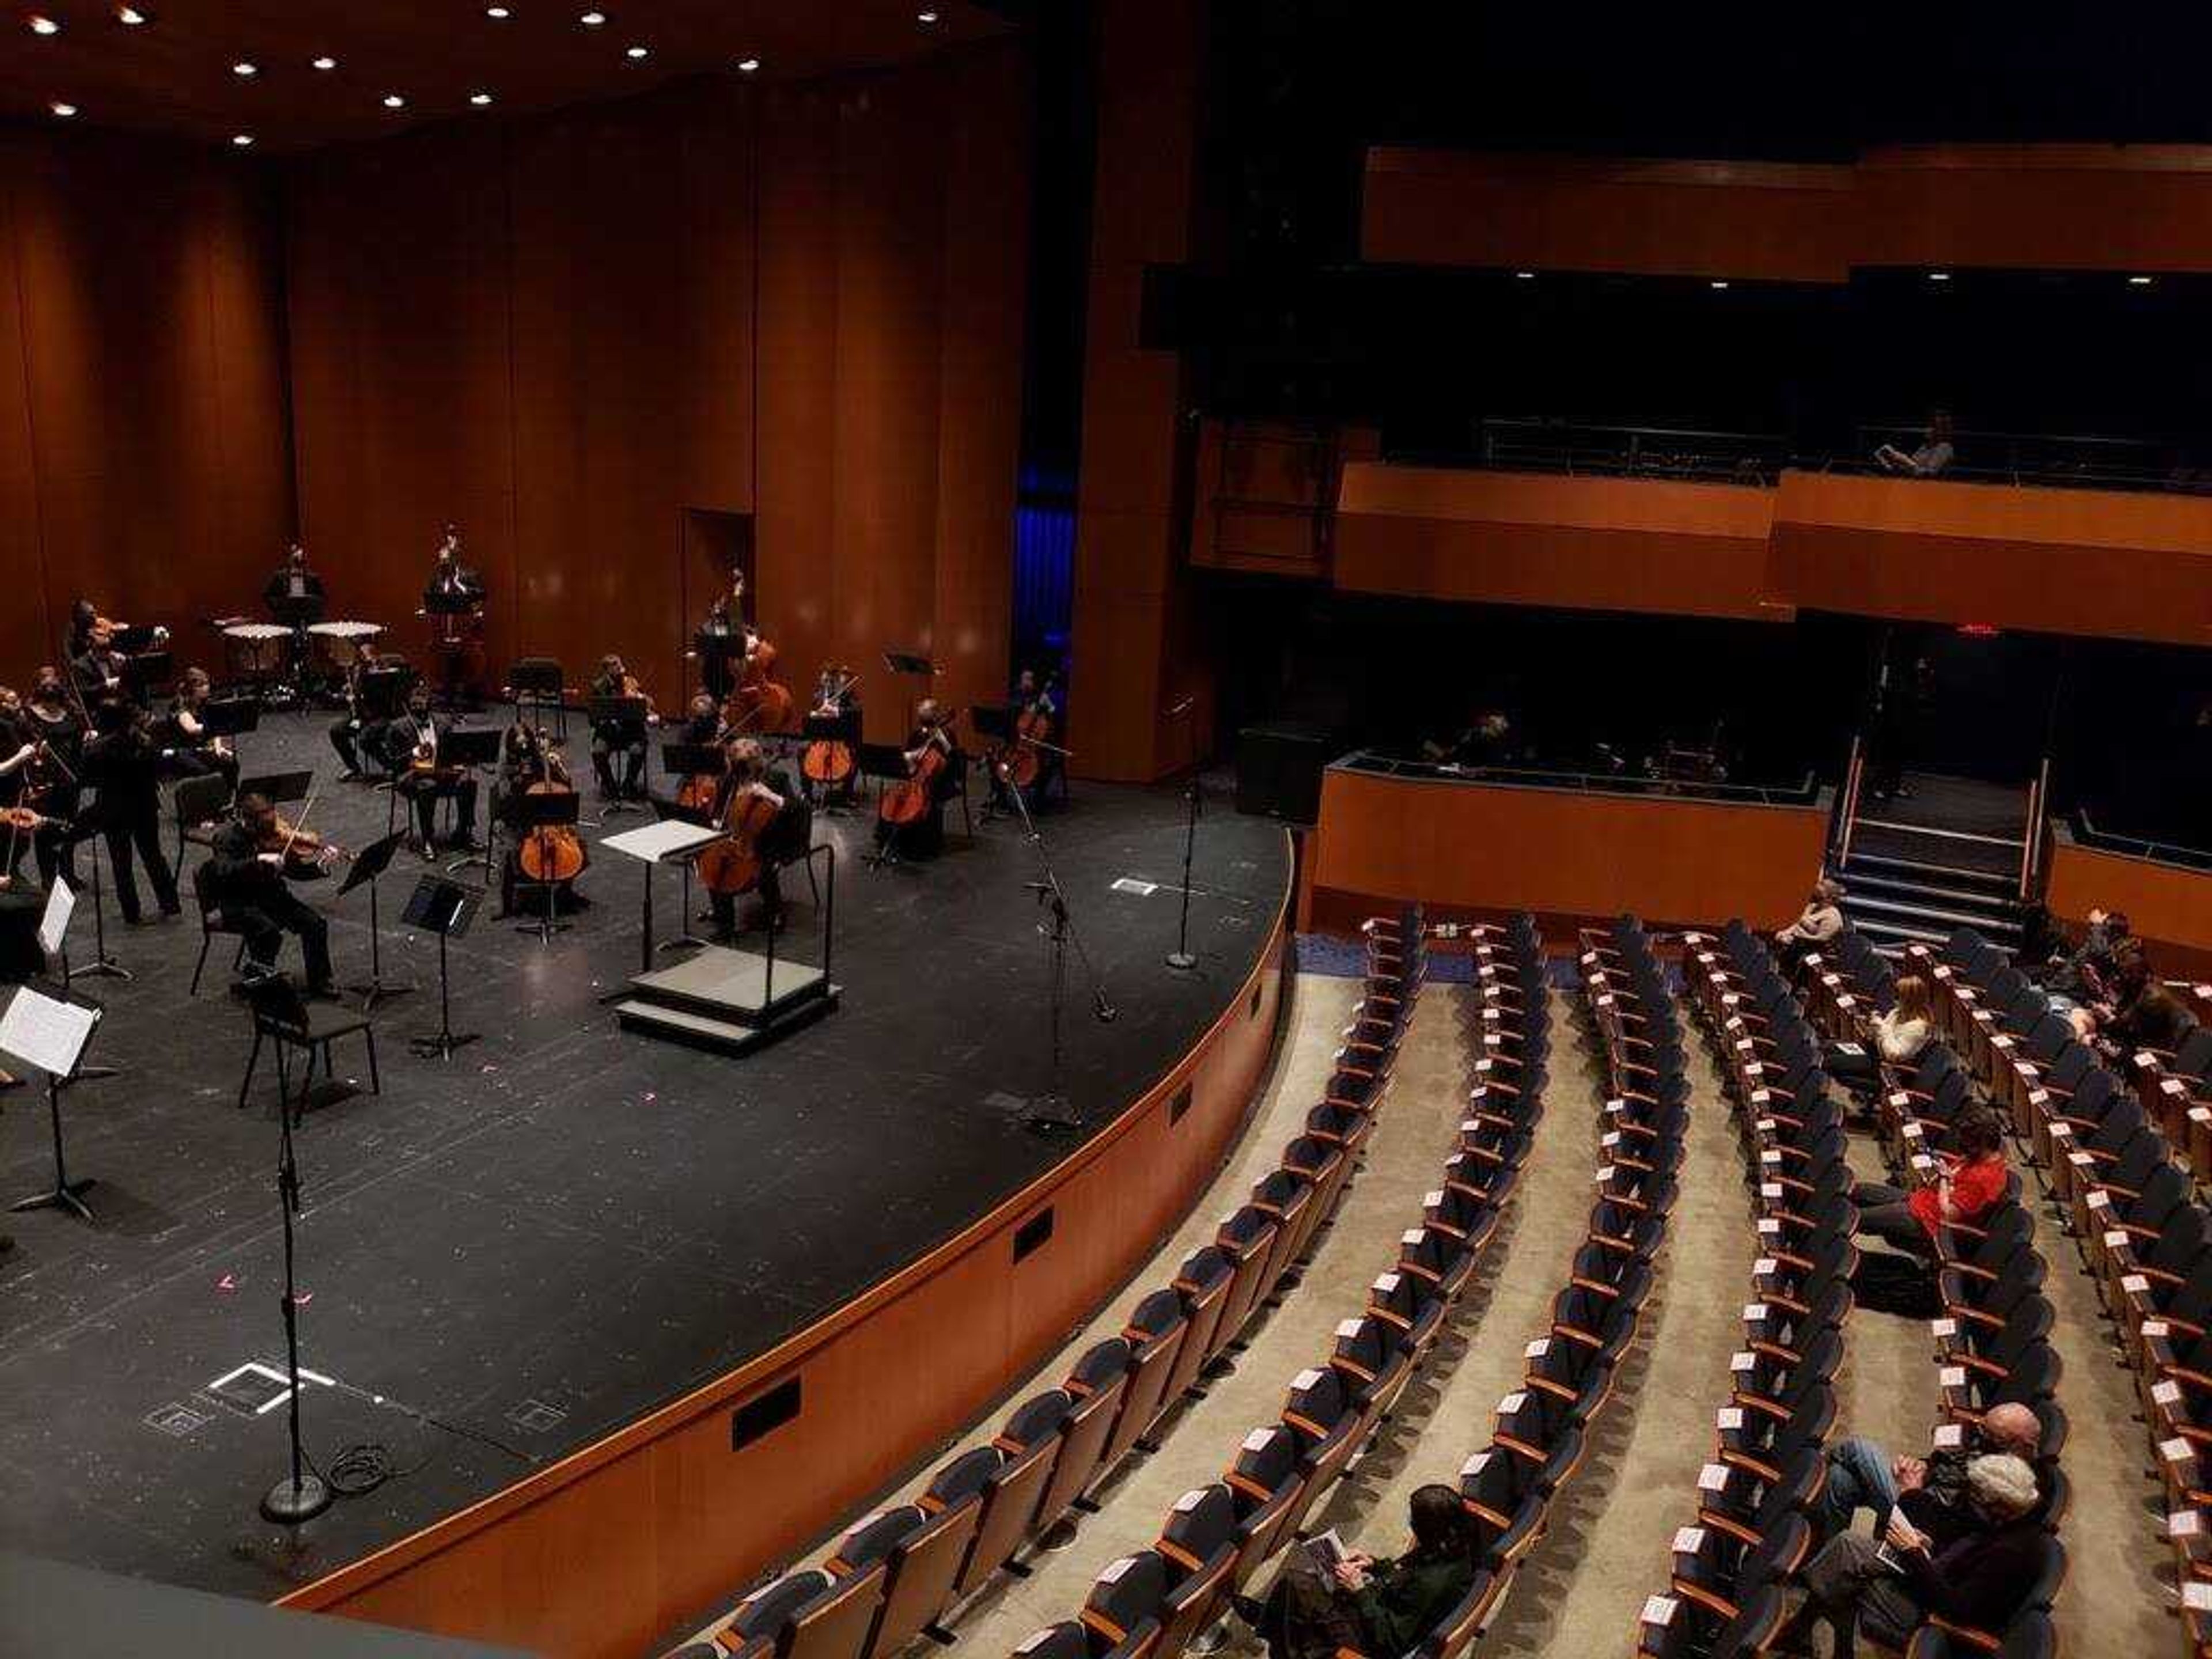 Balcony view of the Southeast Missouri Symphony Orchestra. Before the show started, performers tuned their instruments to get ready.